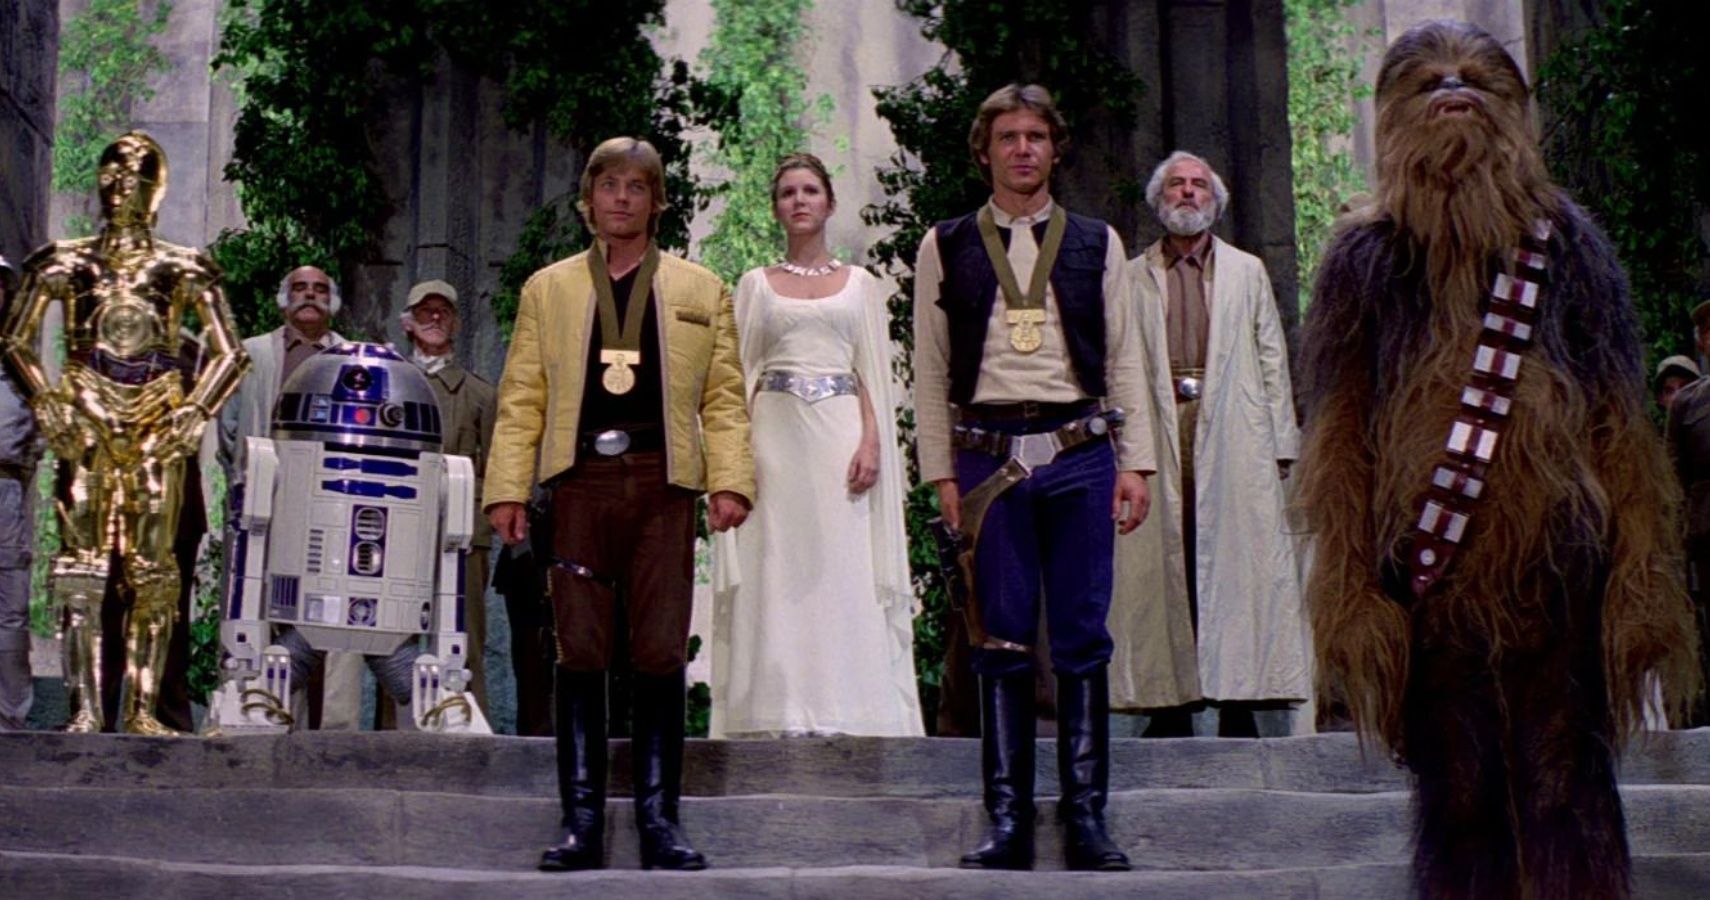 Luke, Han, Leia, Chewbacca, C-3PO,, and R2-D2 at the medal ceremony on Yavin IV in A New Hope